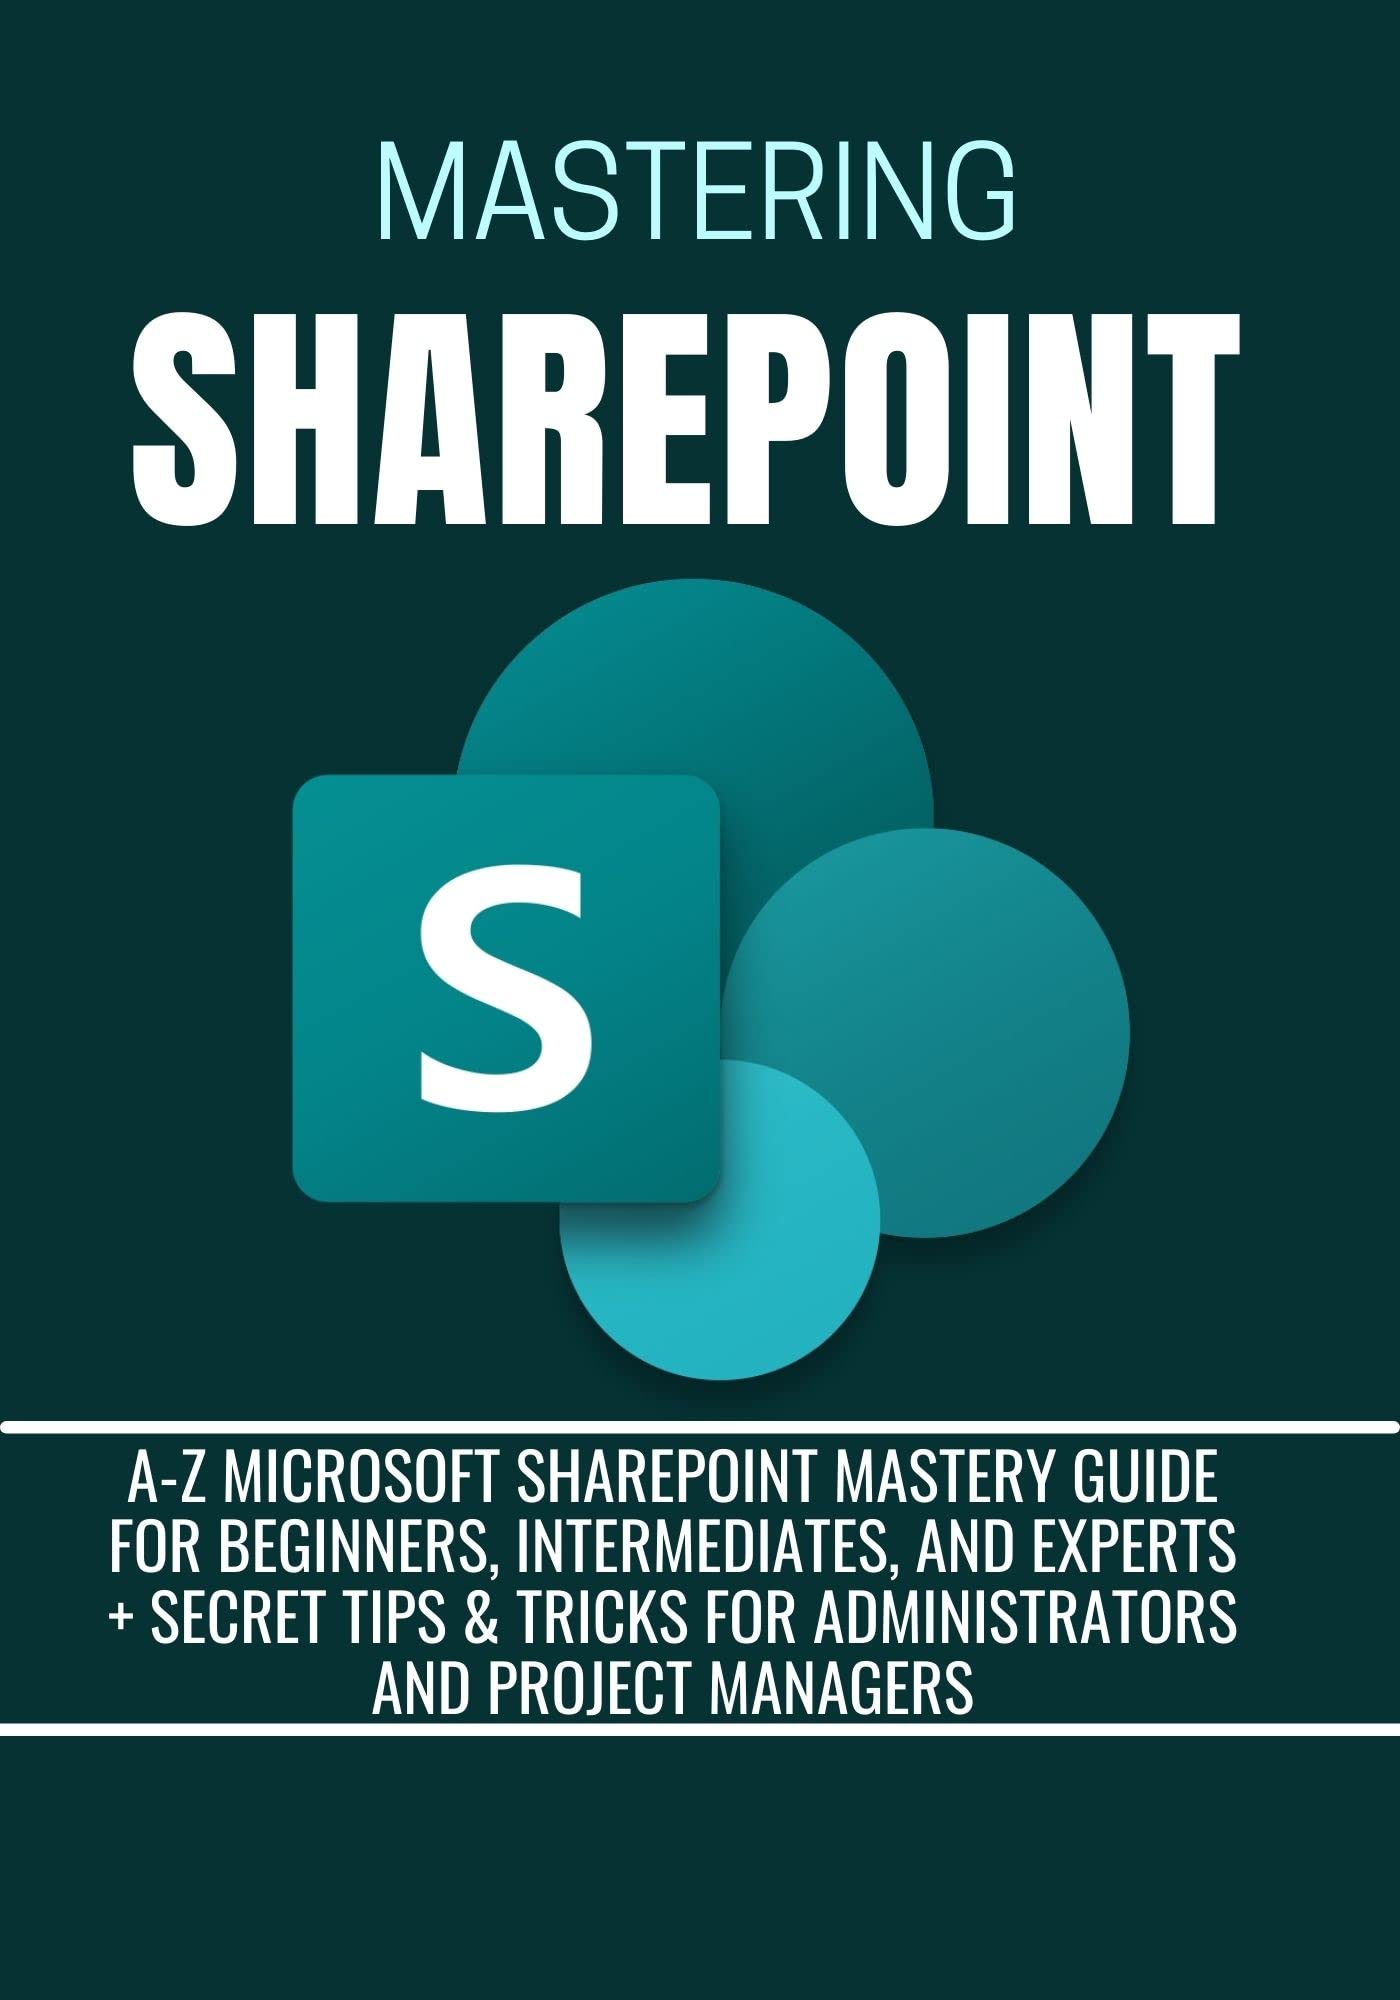 MASTERING SHAREPOINT: A-Z Microsoft SharePoint Mastery Guide for Beginners, Intermediates, and Experts + Secret Tips & Tricks for Administrators and Project managers